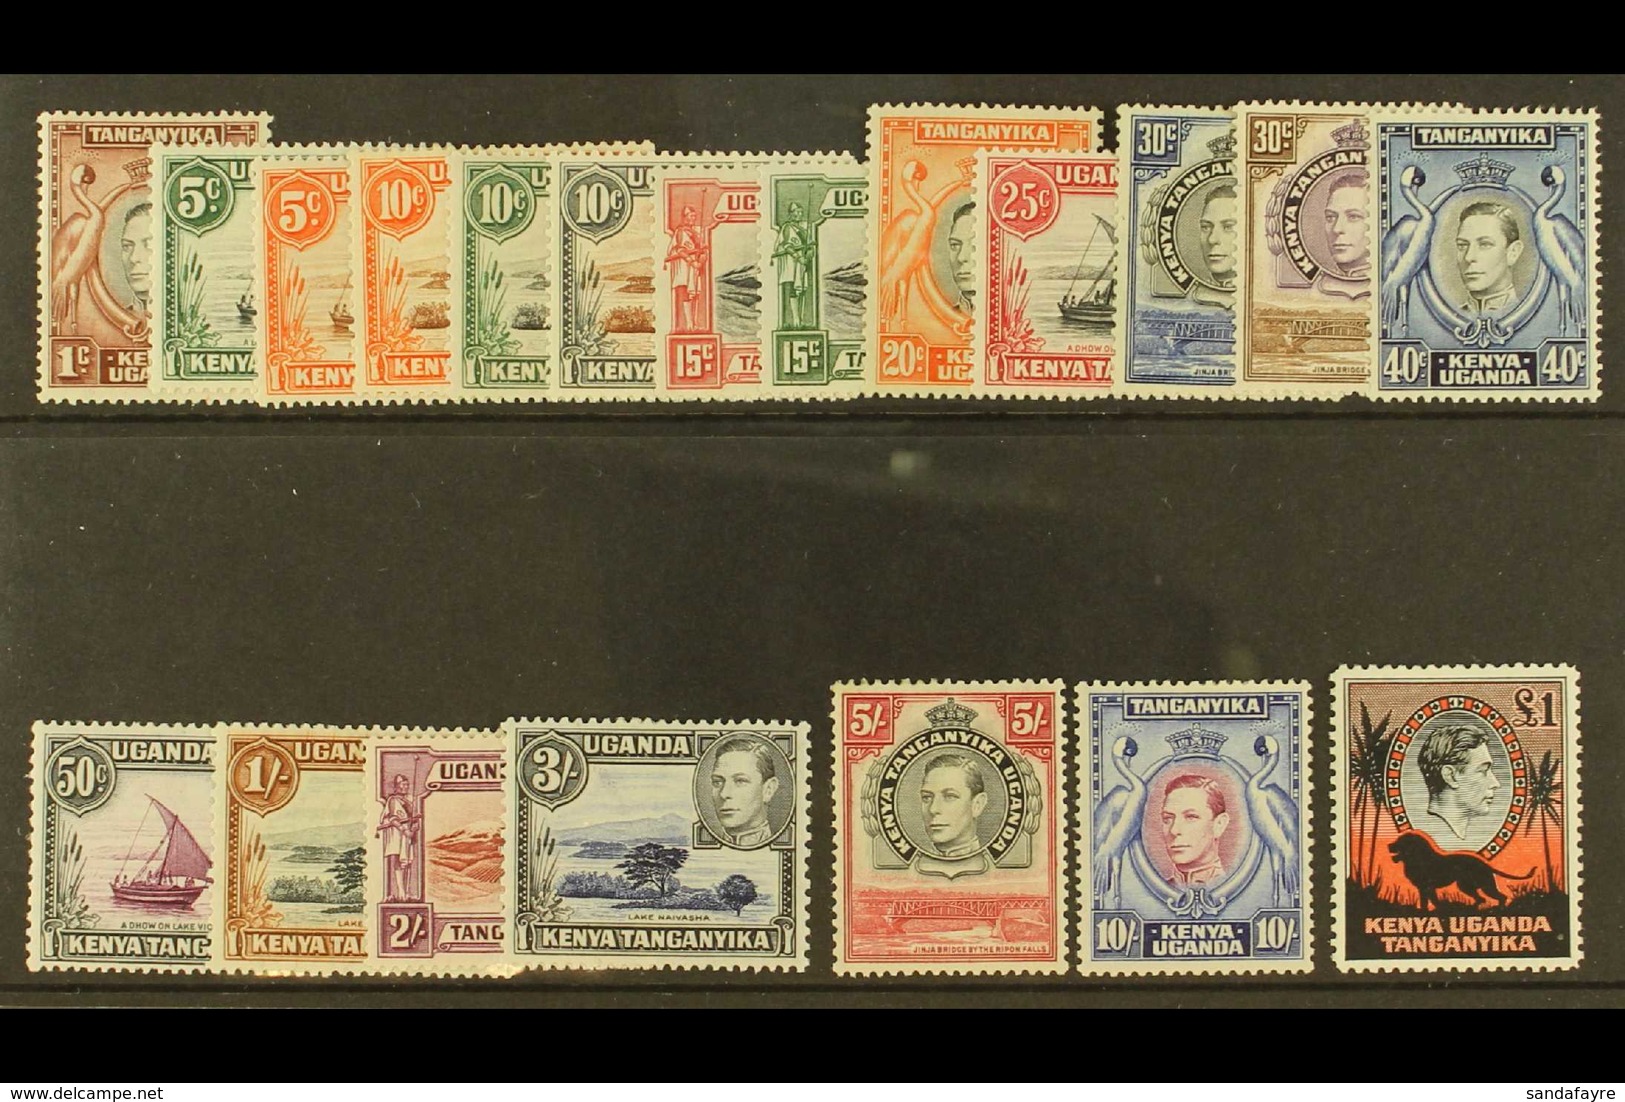 1938-54 Complete Definitive Set, SG 131/150b, Fine Mint, Includes Several Of The Better Perf E.g. 5s And 10s. (20 Stamps - Vide